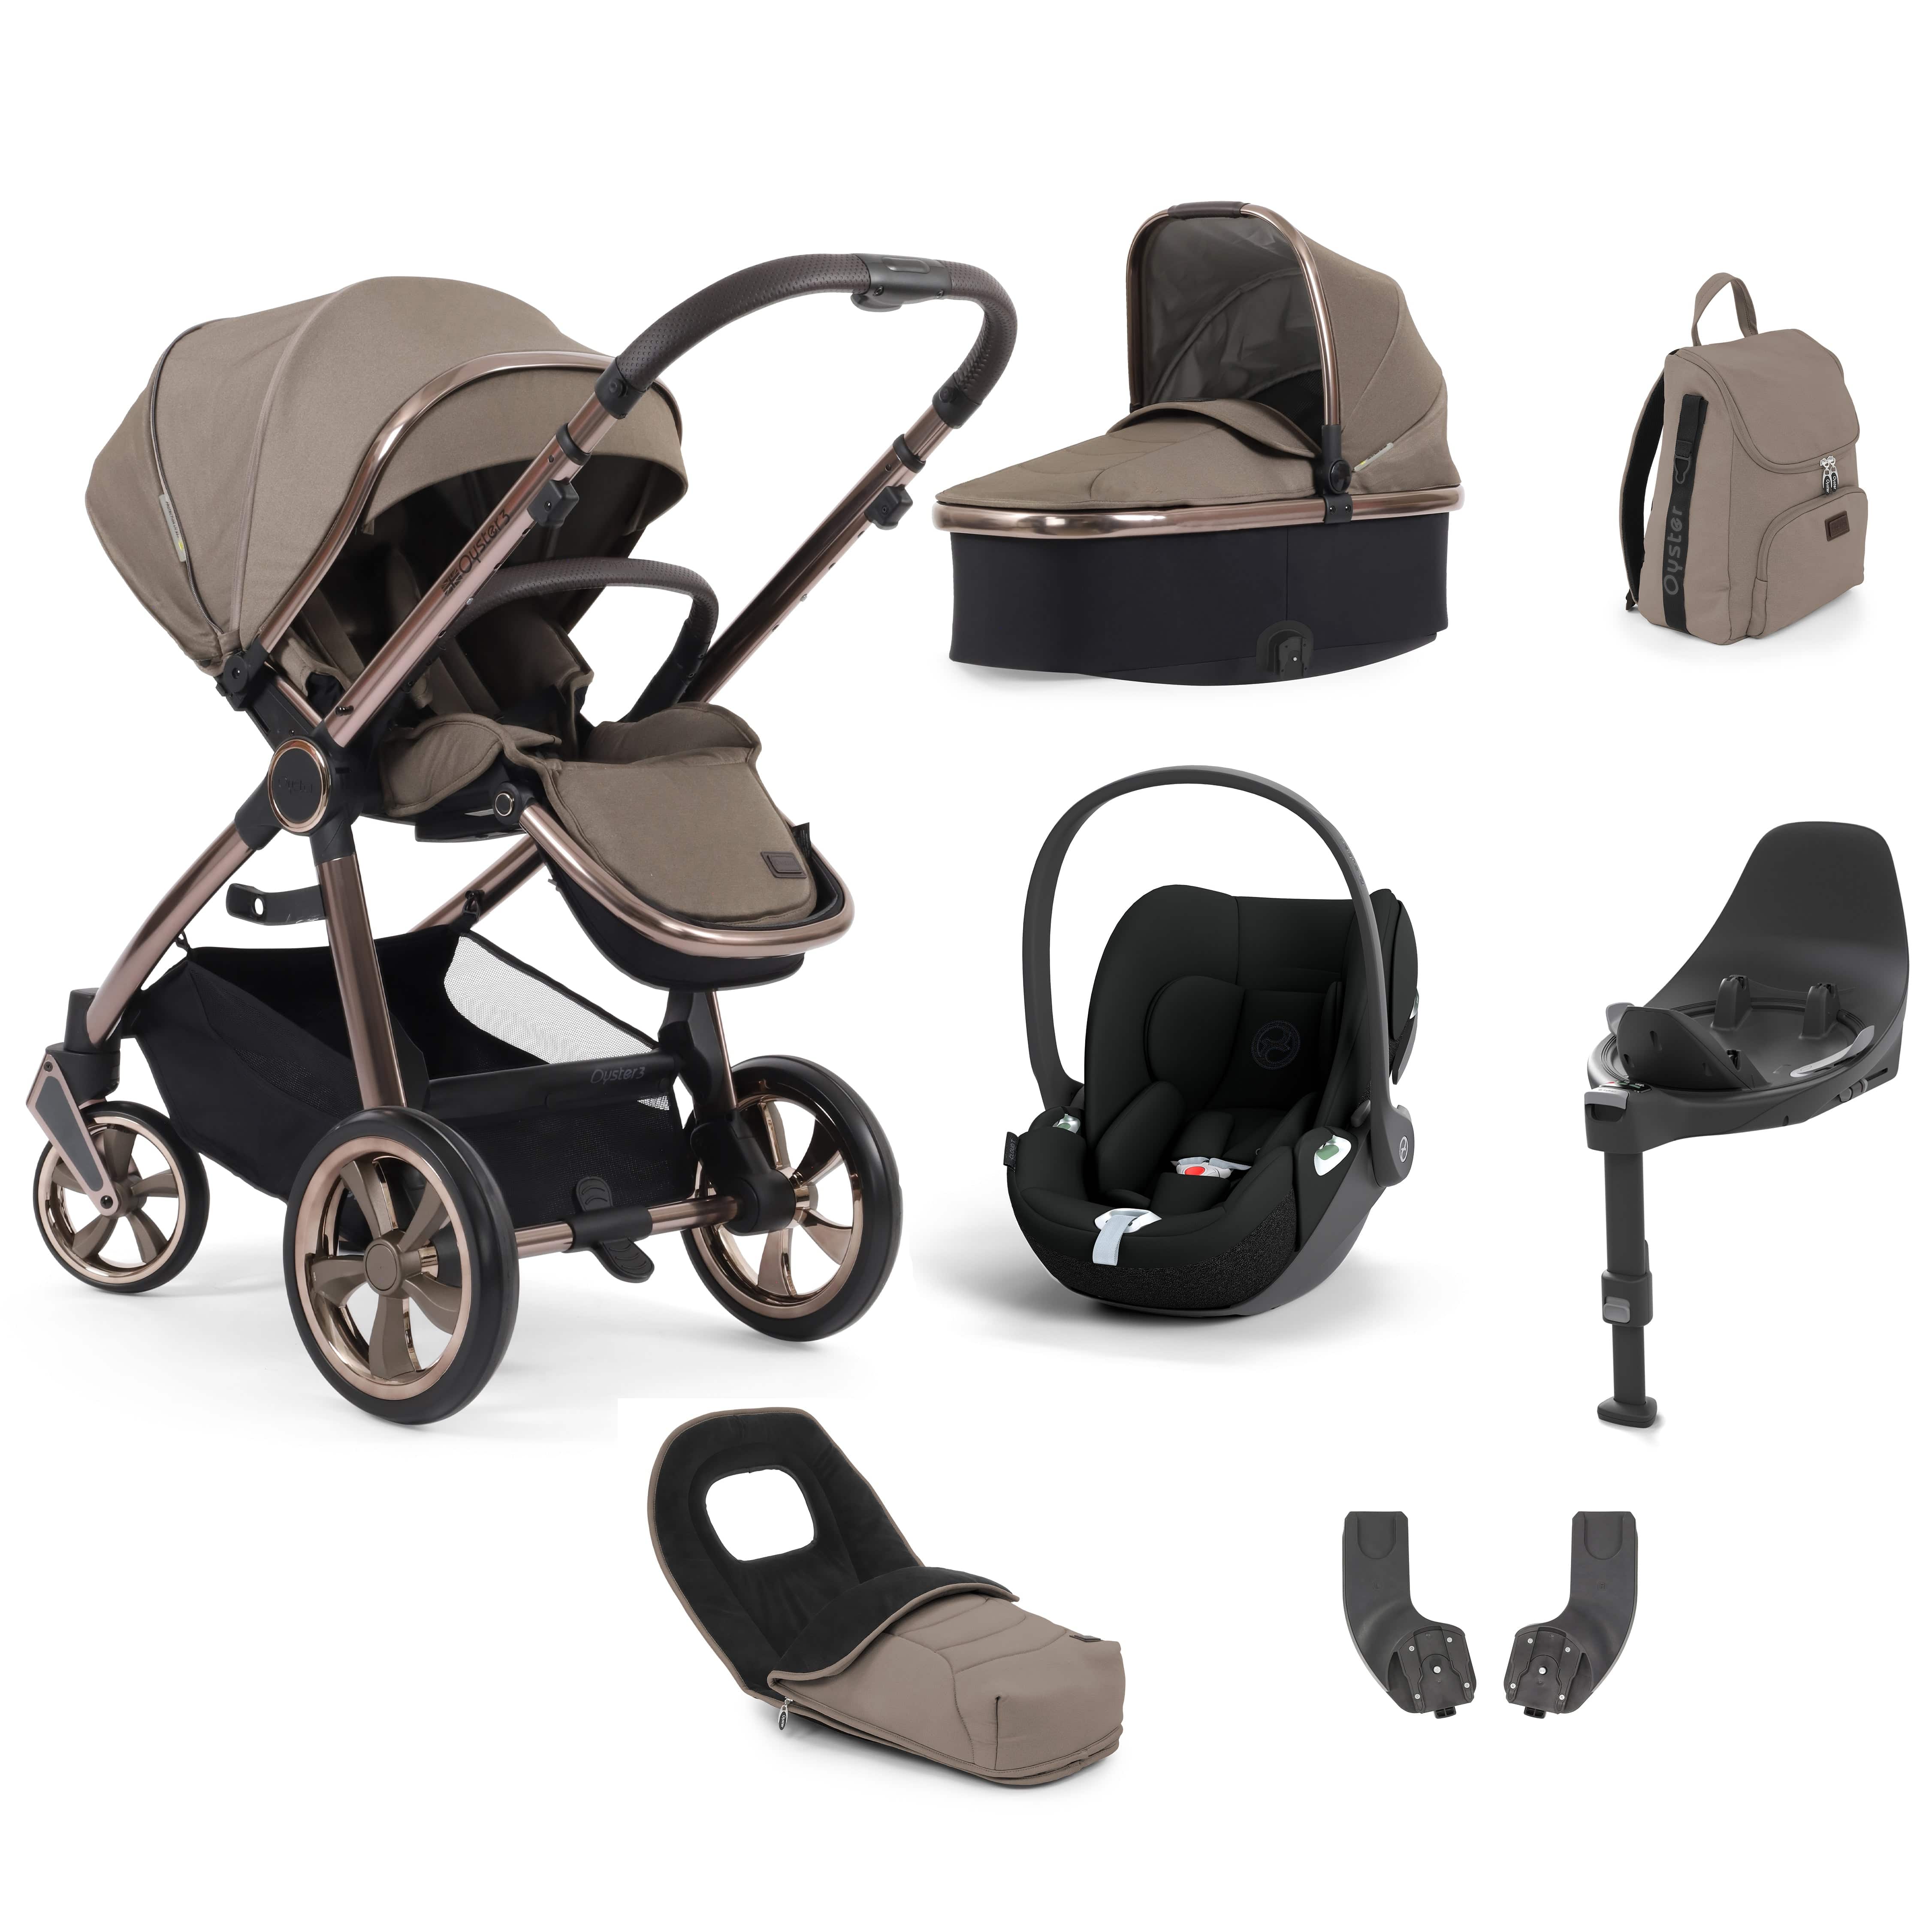 Babystyle Oyster 3 Luxury 7 Piece with Car Seat Bundle in Mink Travel Systems 14800-MNK 5060711566894